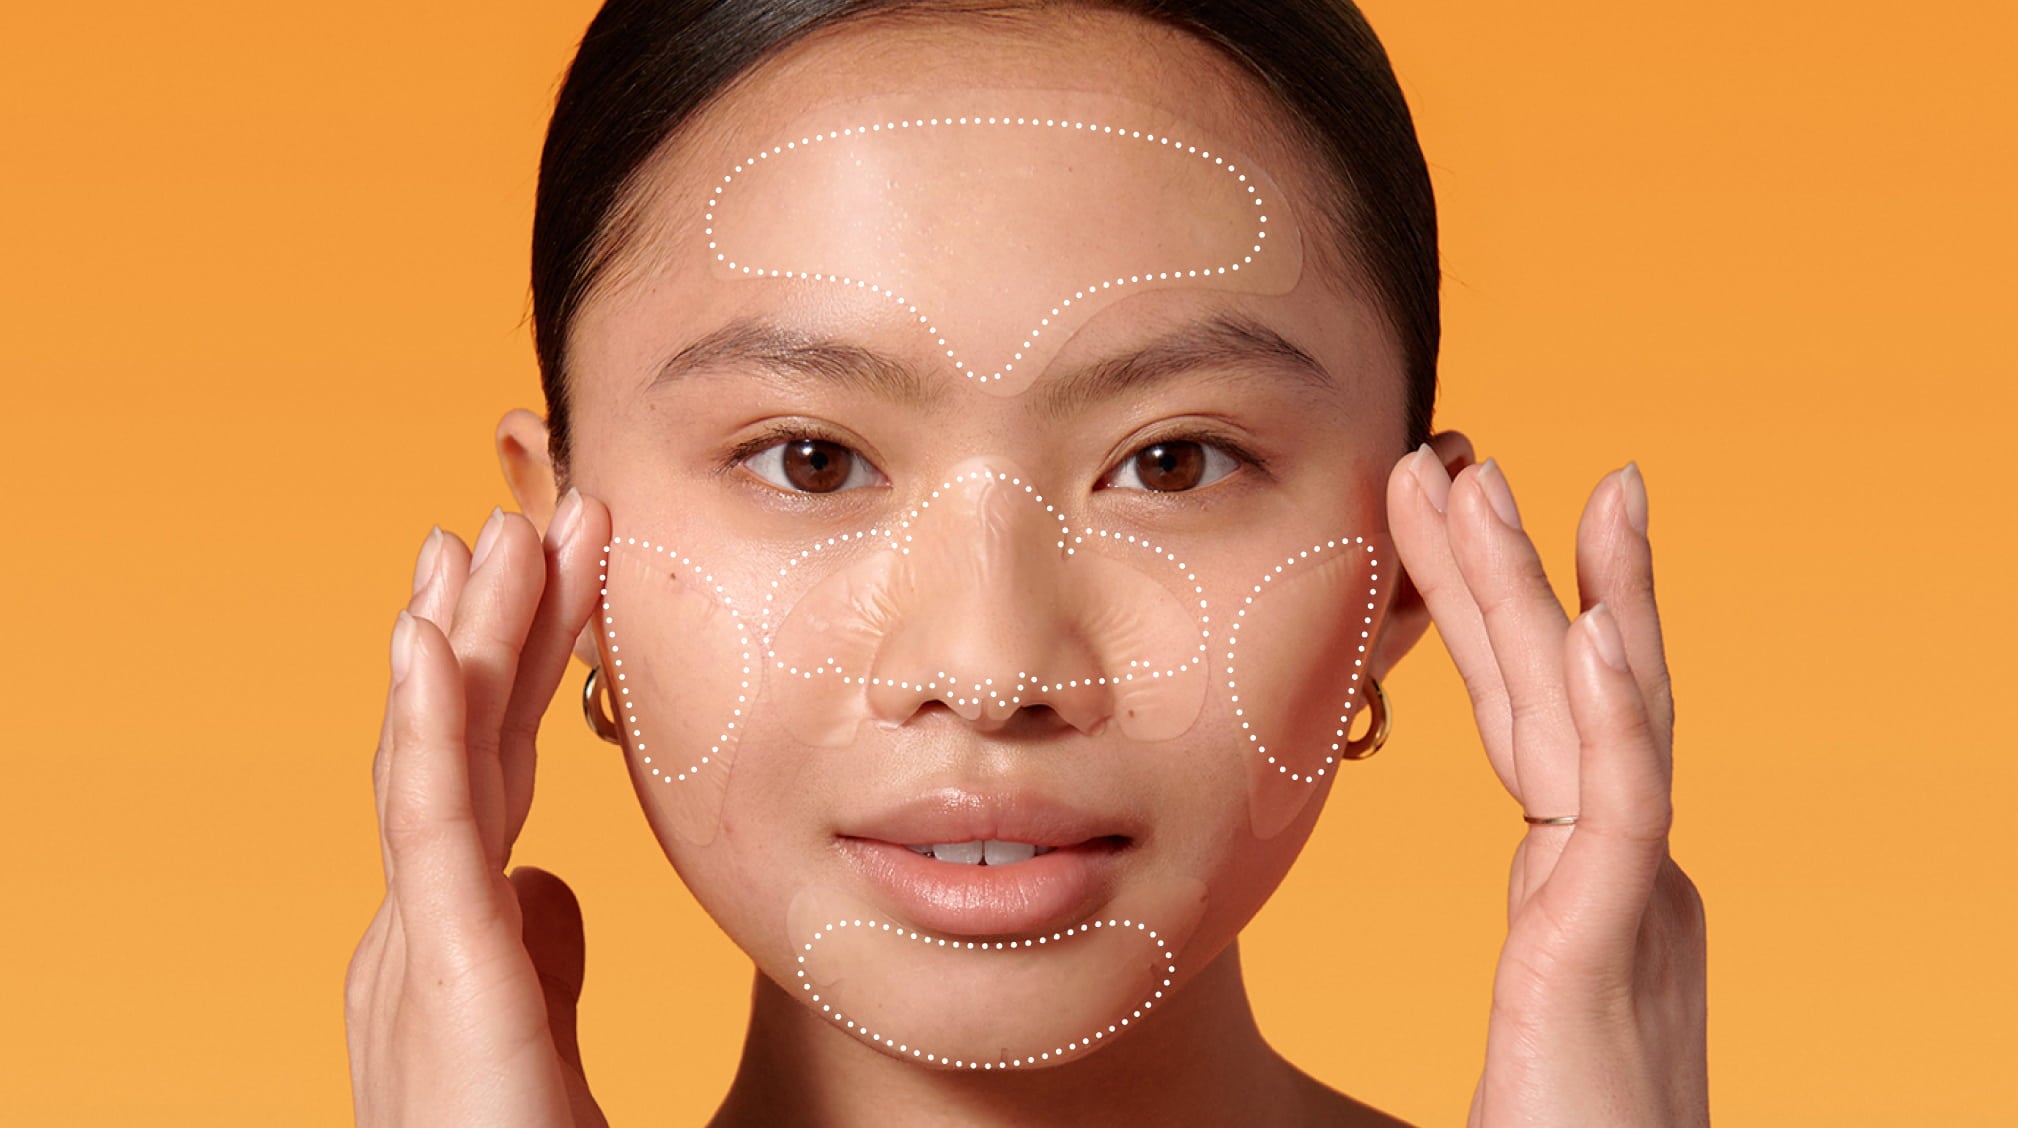 Face Mapping: What Your Acne Could Be Telling You